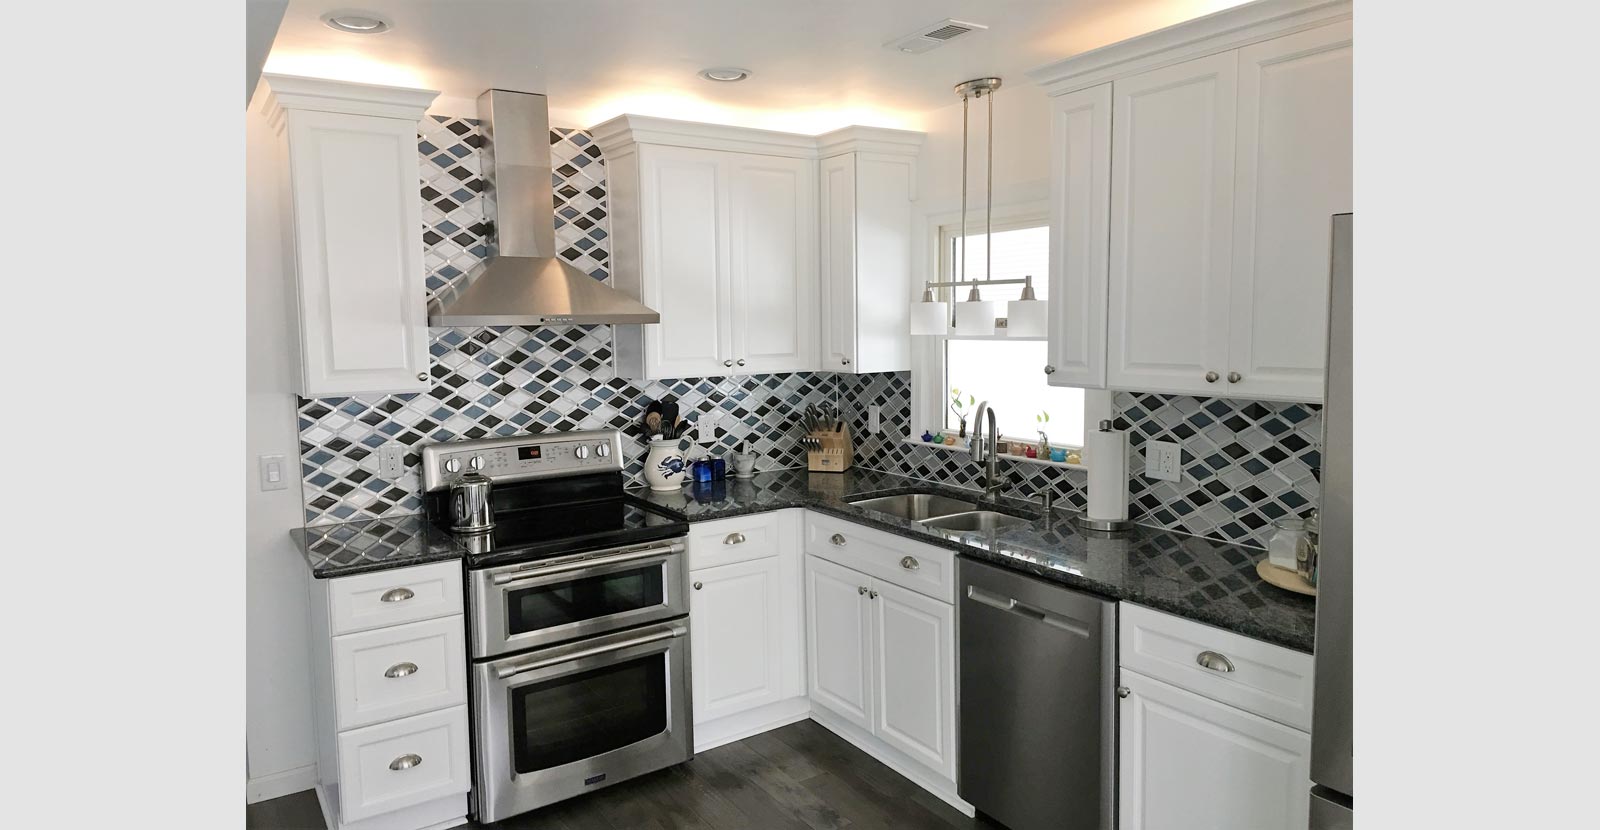 kitchen remodeling featuring stove ventilation system and decorative wall splash